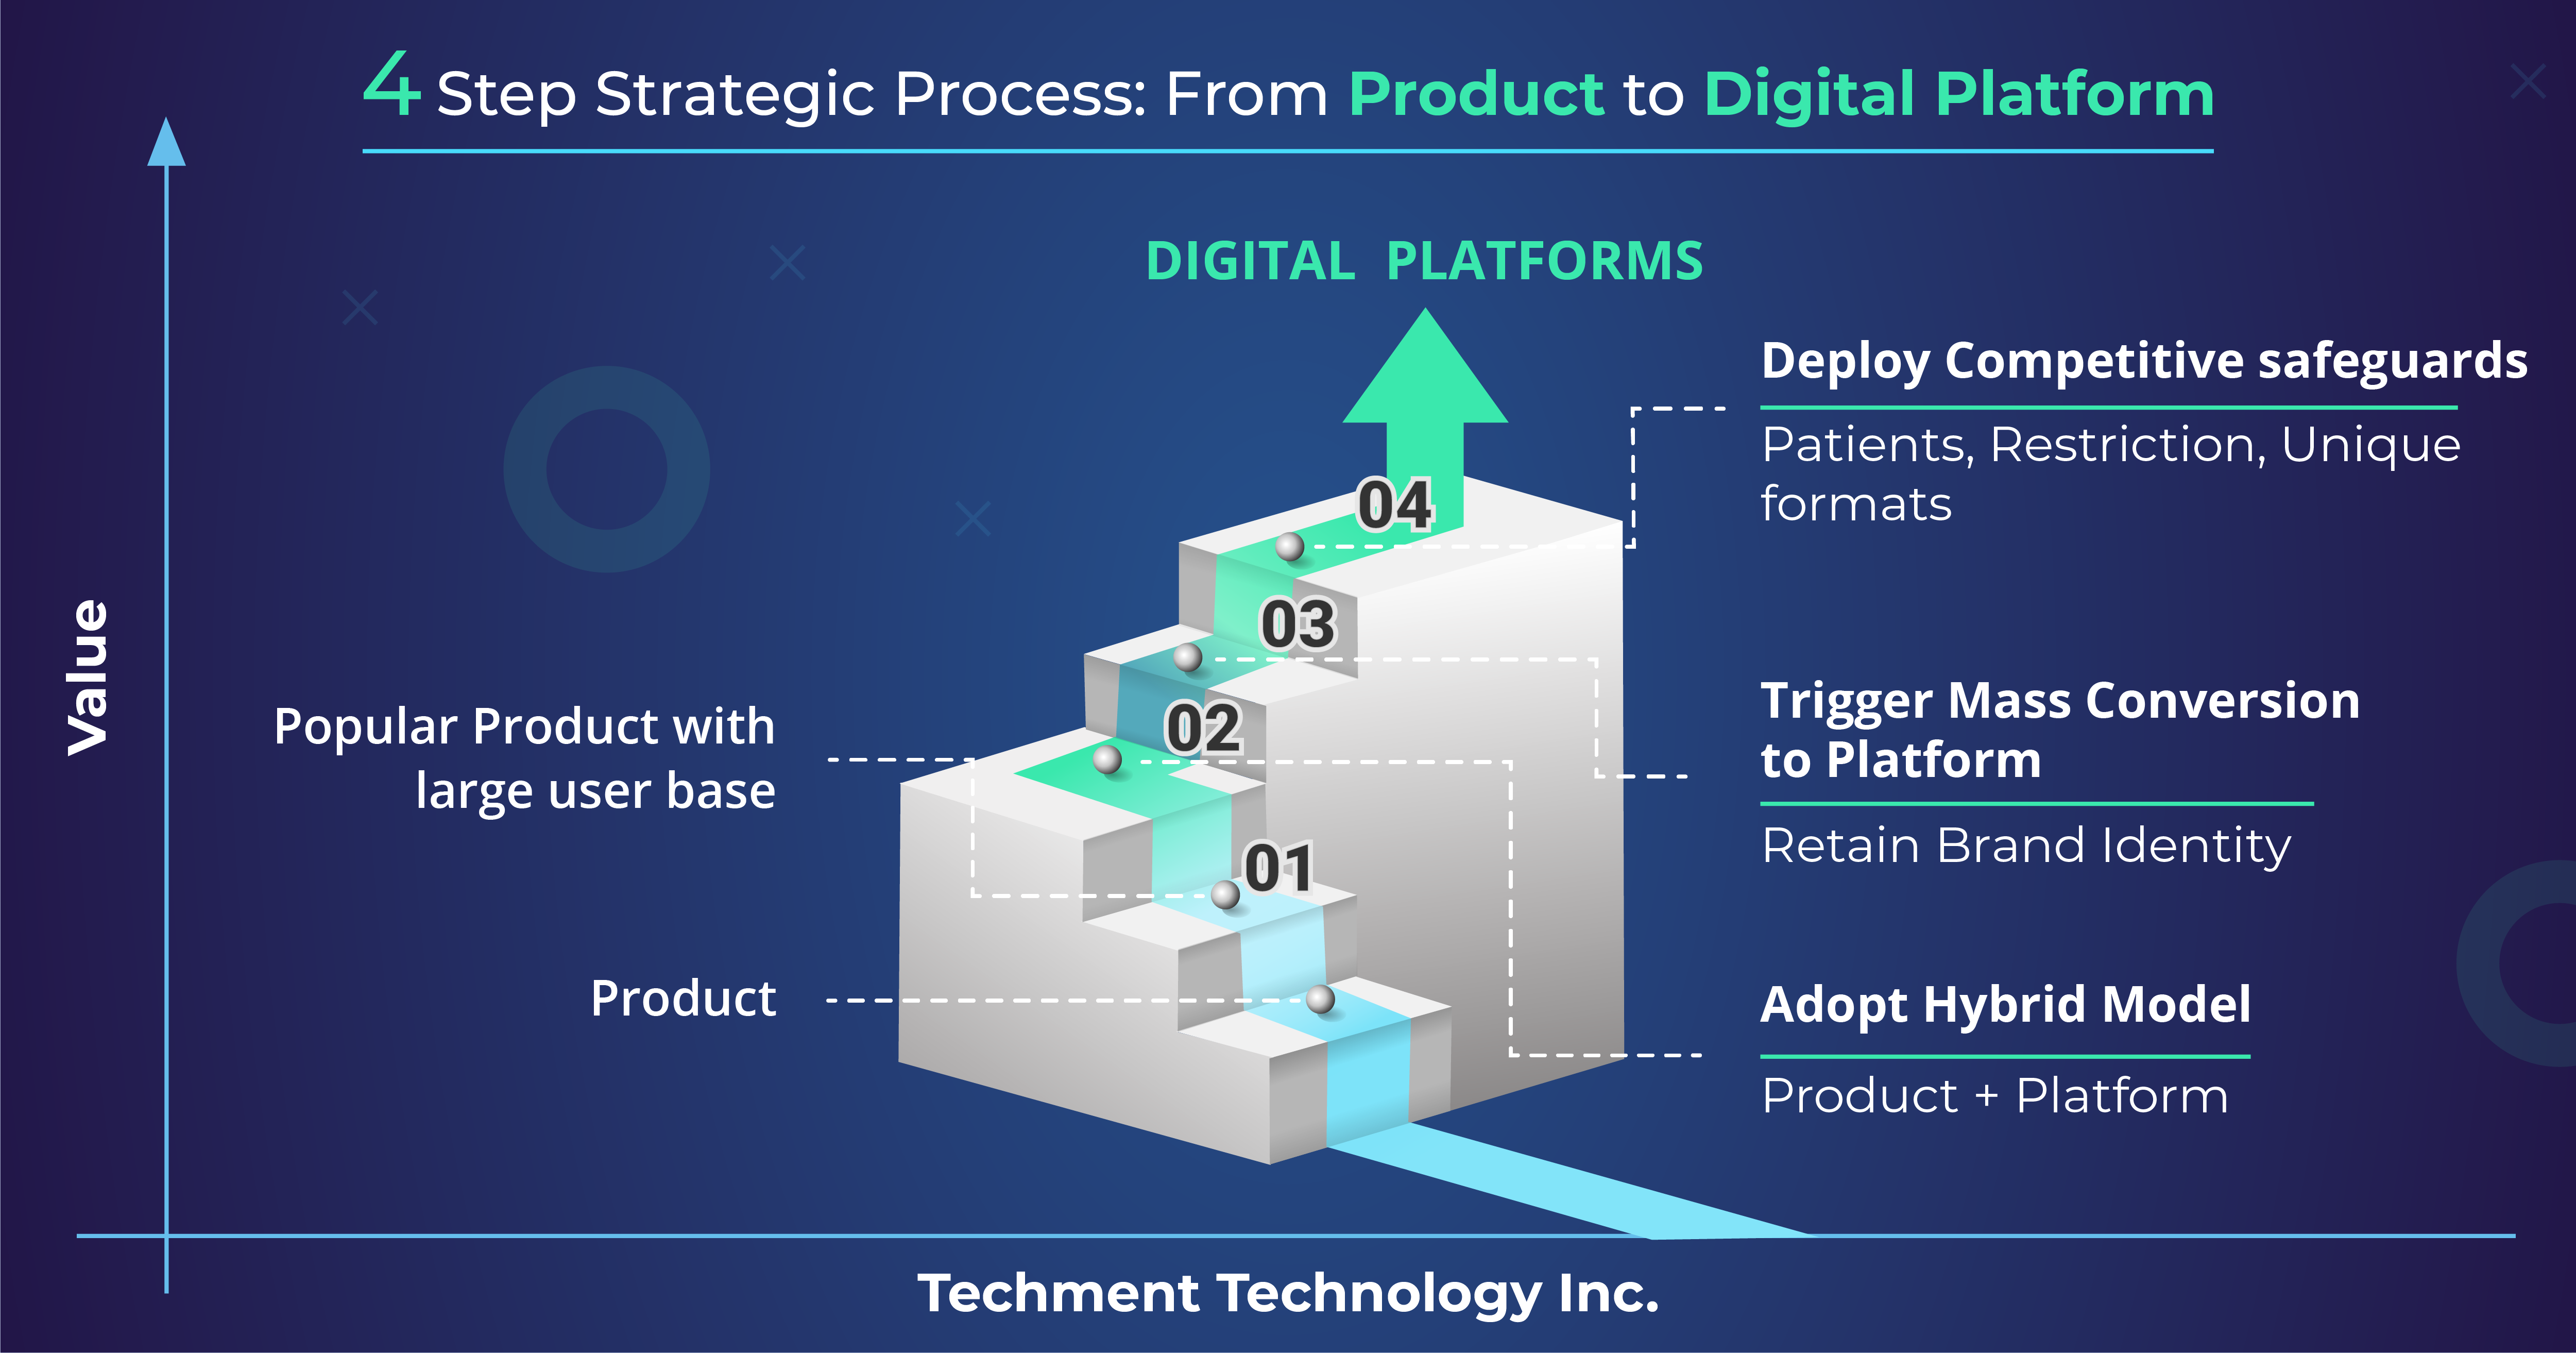 4 Step Strategic Process from Product to Digital Platform